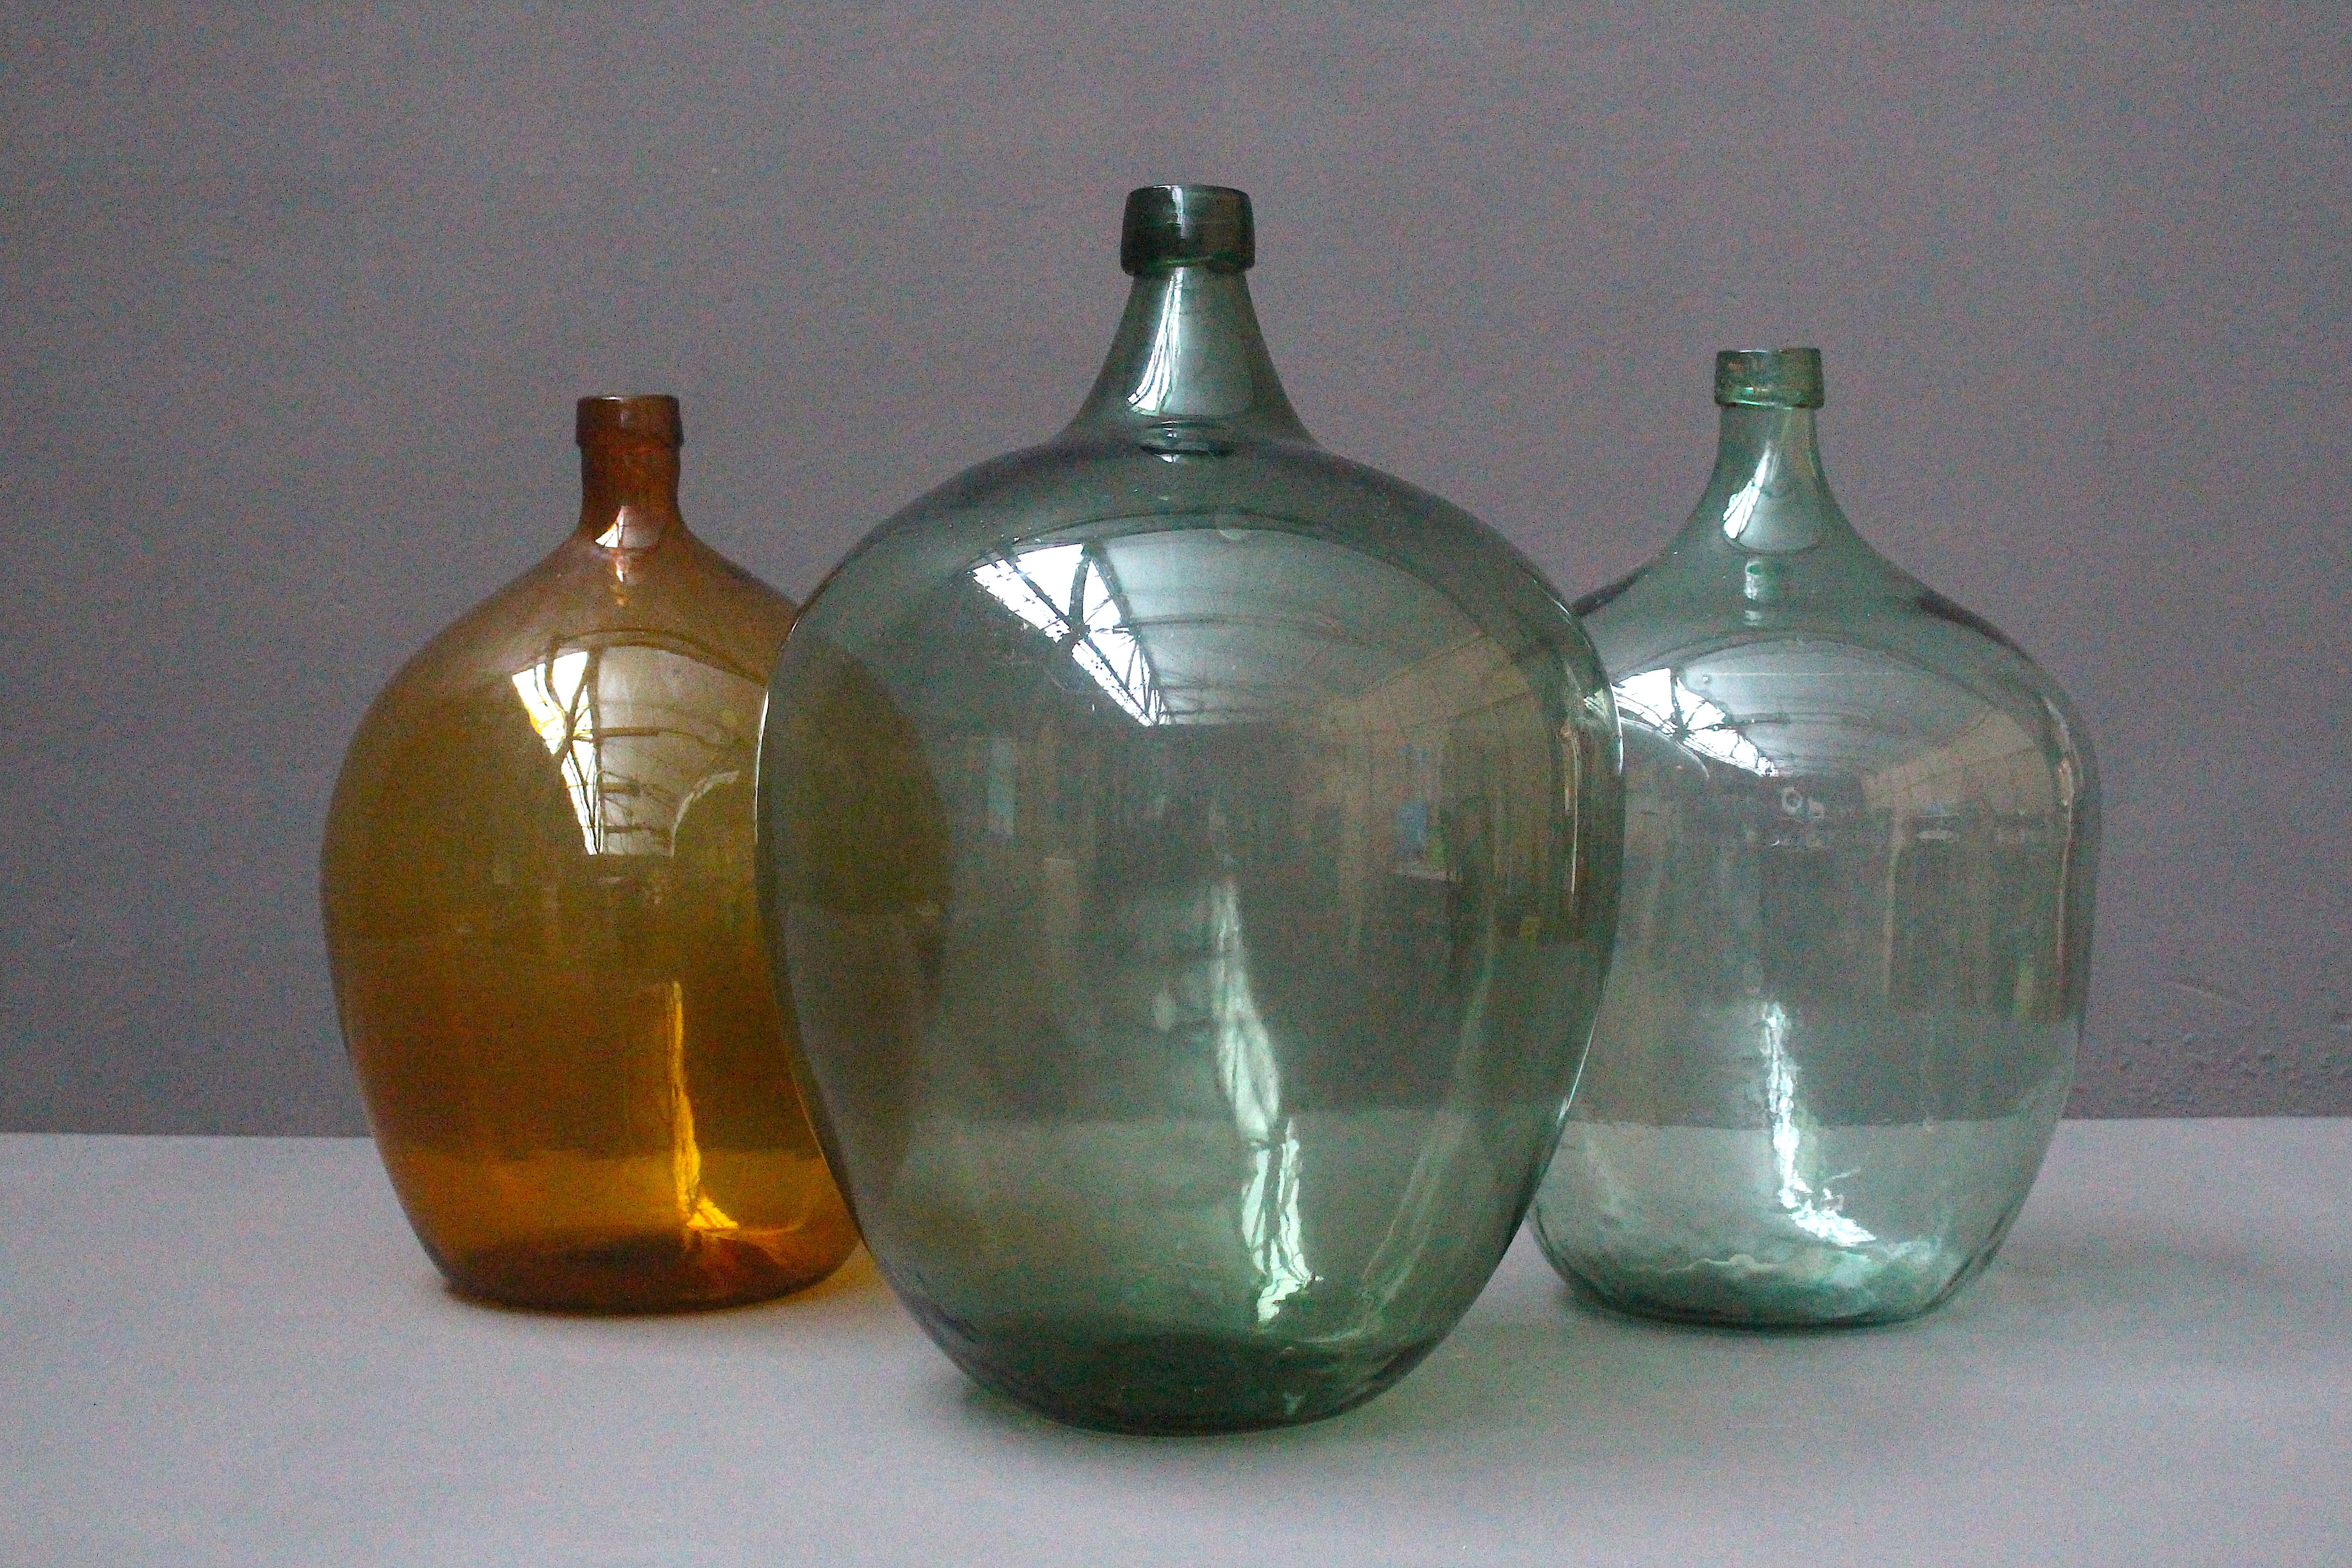 Lovely collection of French hand blown glass wine bottles from circa 1900.
Very decorative pieces.
These bottles have some beautiful air bubbles in the glass.
The ombre color is very unique.